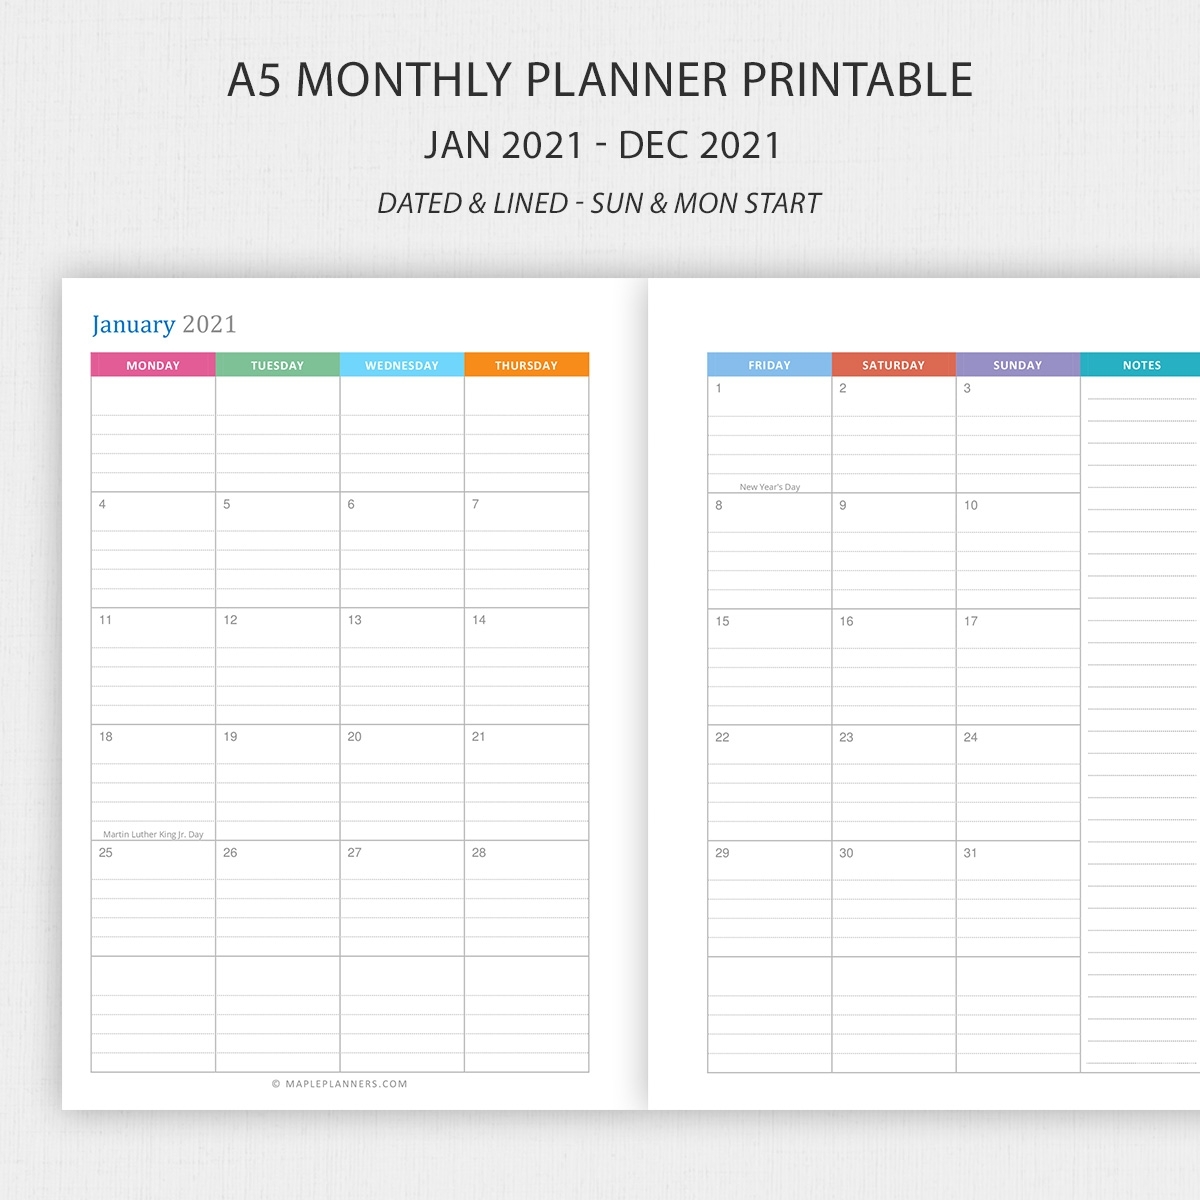 Printable A5 Monthly Planner 2021